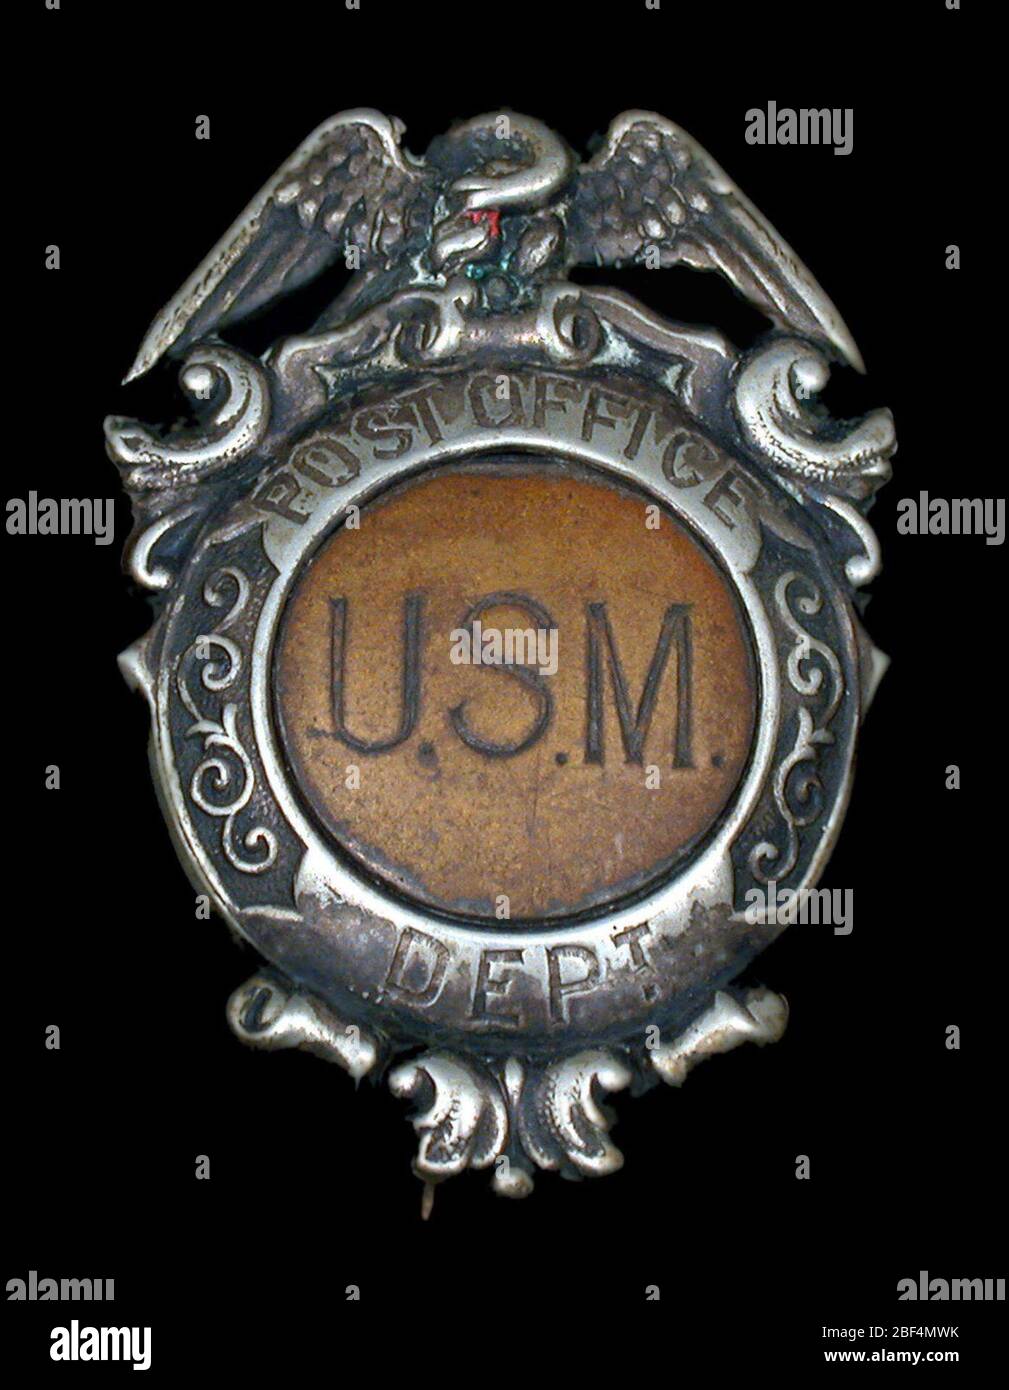 Guard chest badge. United States Post Office Department guard badge with vertical hinged pin and clasp on verso. Spread eagle surmounts medallion with skirt. Upper portion marked 'POST OFFICE'; lower portion inscribed 'DEPT'; medallion center bears the letters 'U.S.M.' Stock Photo